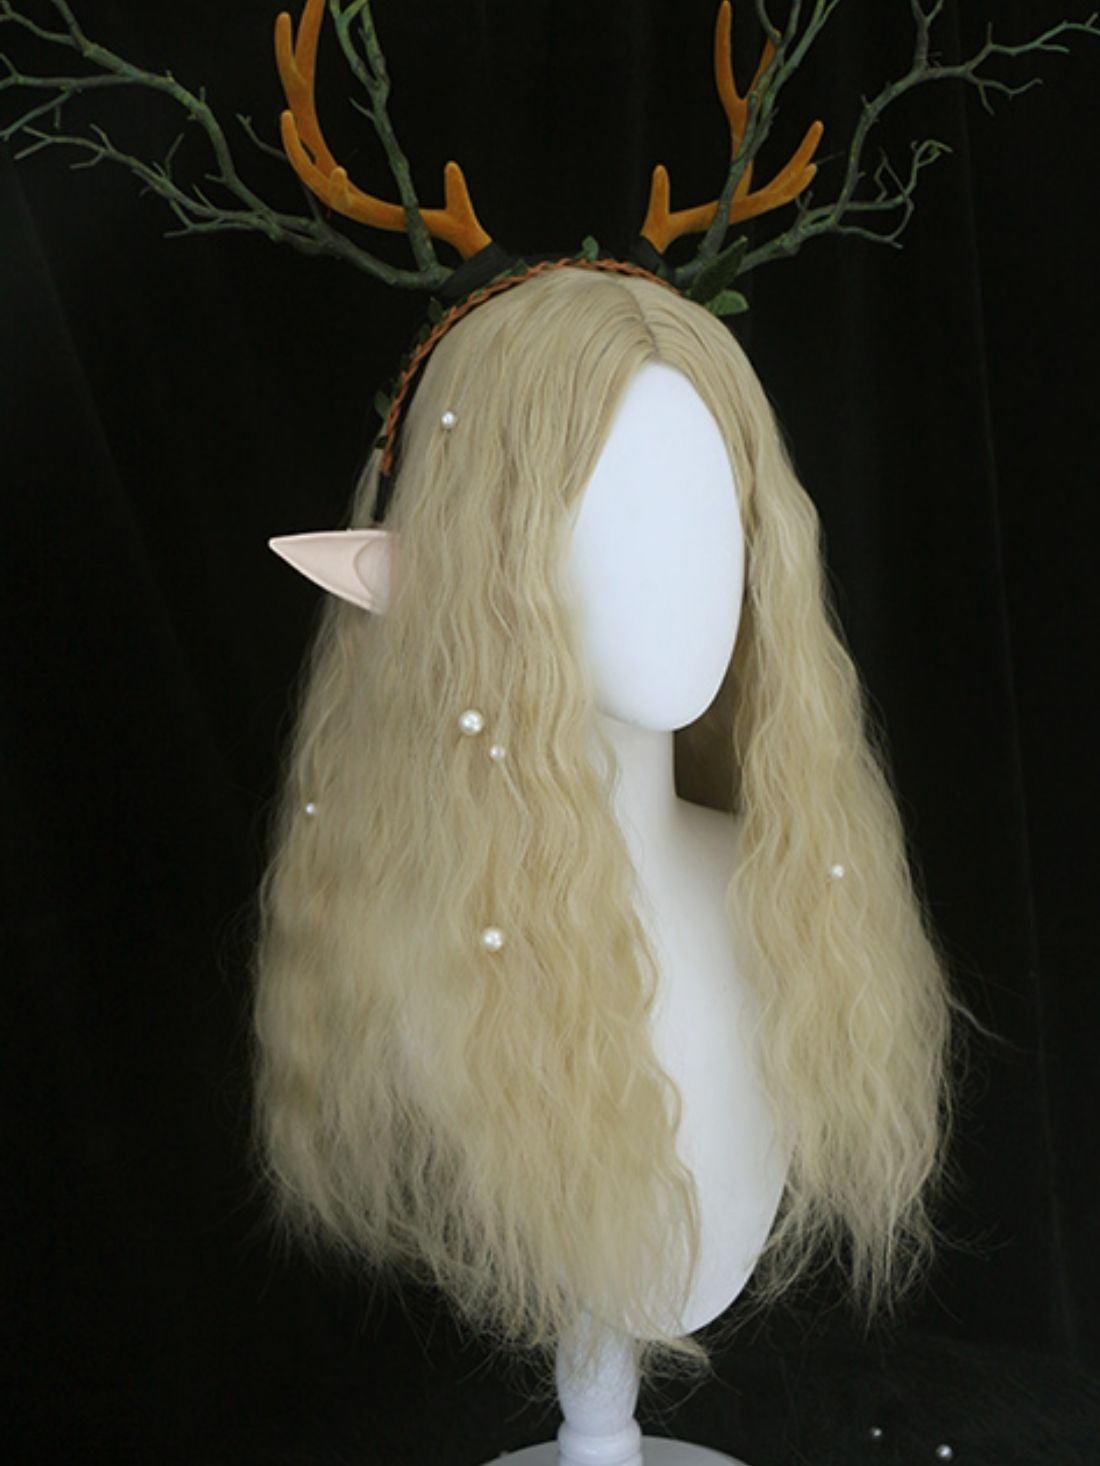 2022 Vintage Style Blonde Long Wavy Synthetic Wig